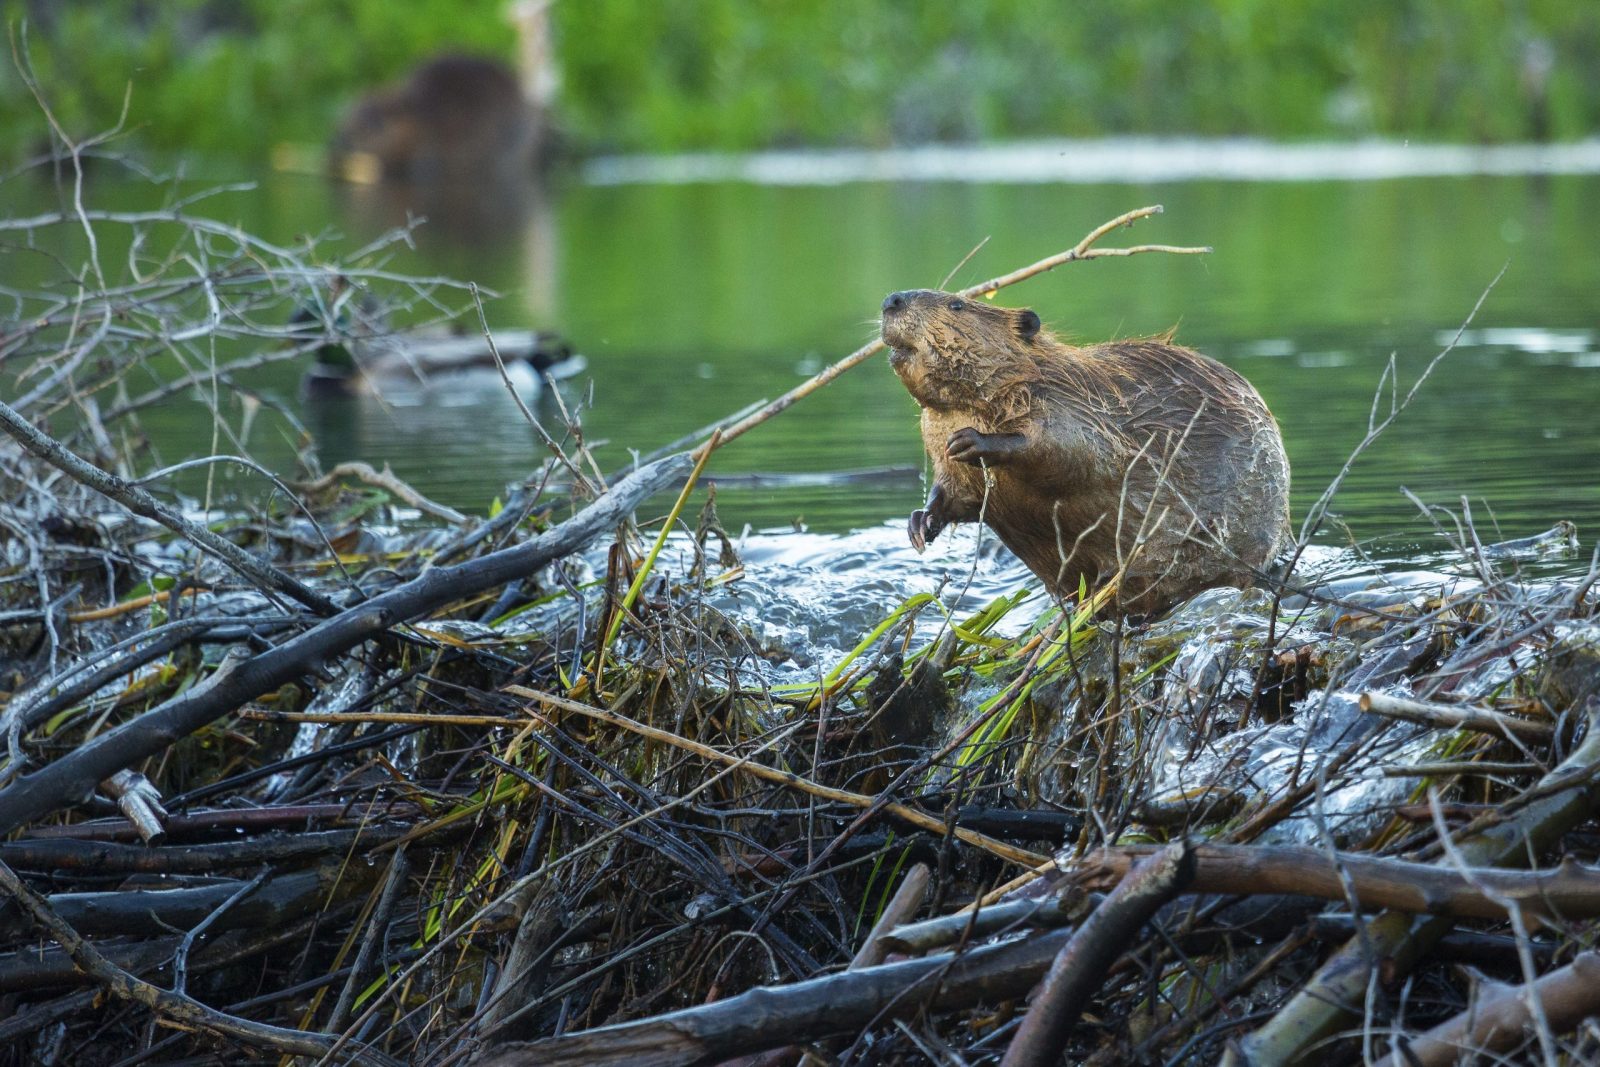 South Carolina County Encourages Citizens to Kill Beavers and Bring in Their Front Paws for Compensation